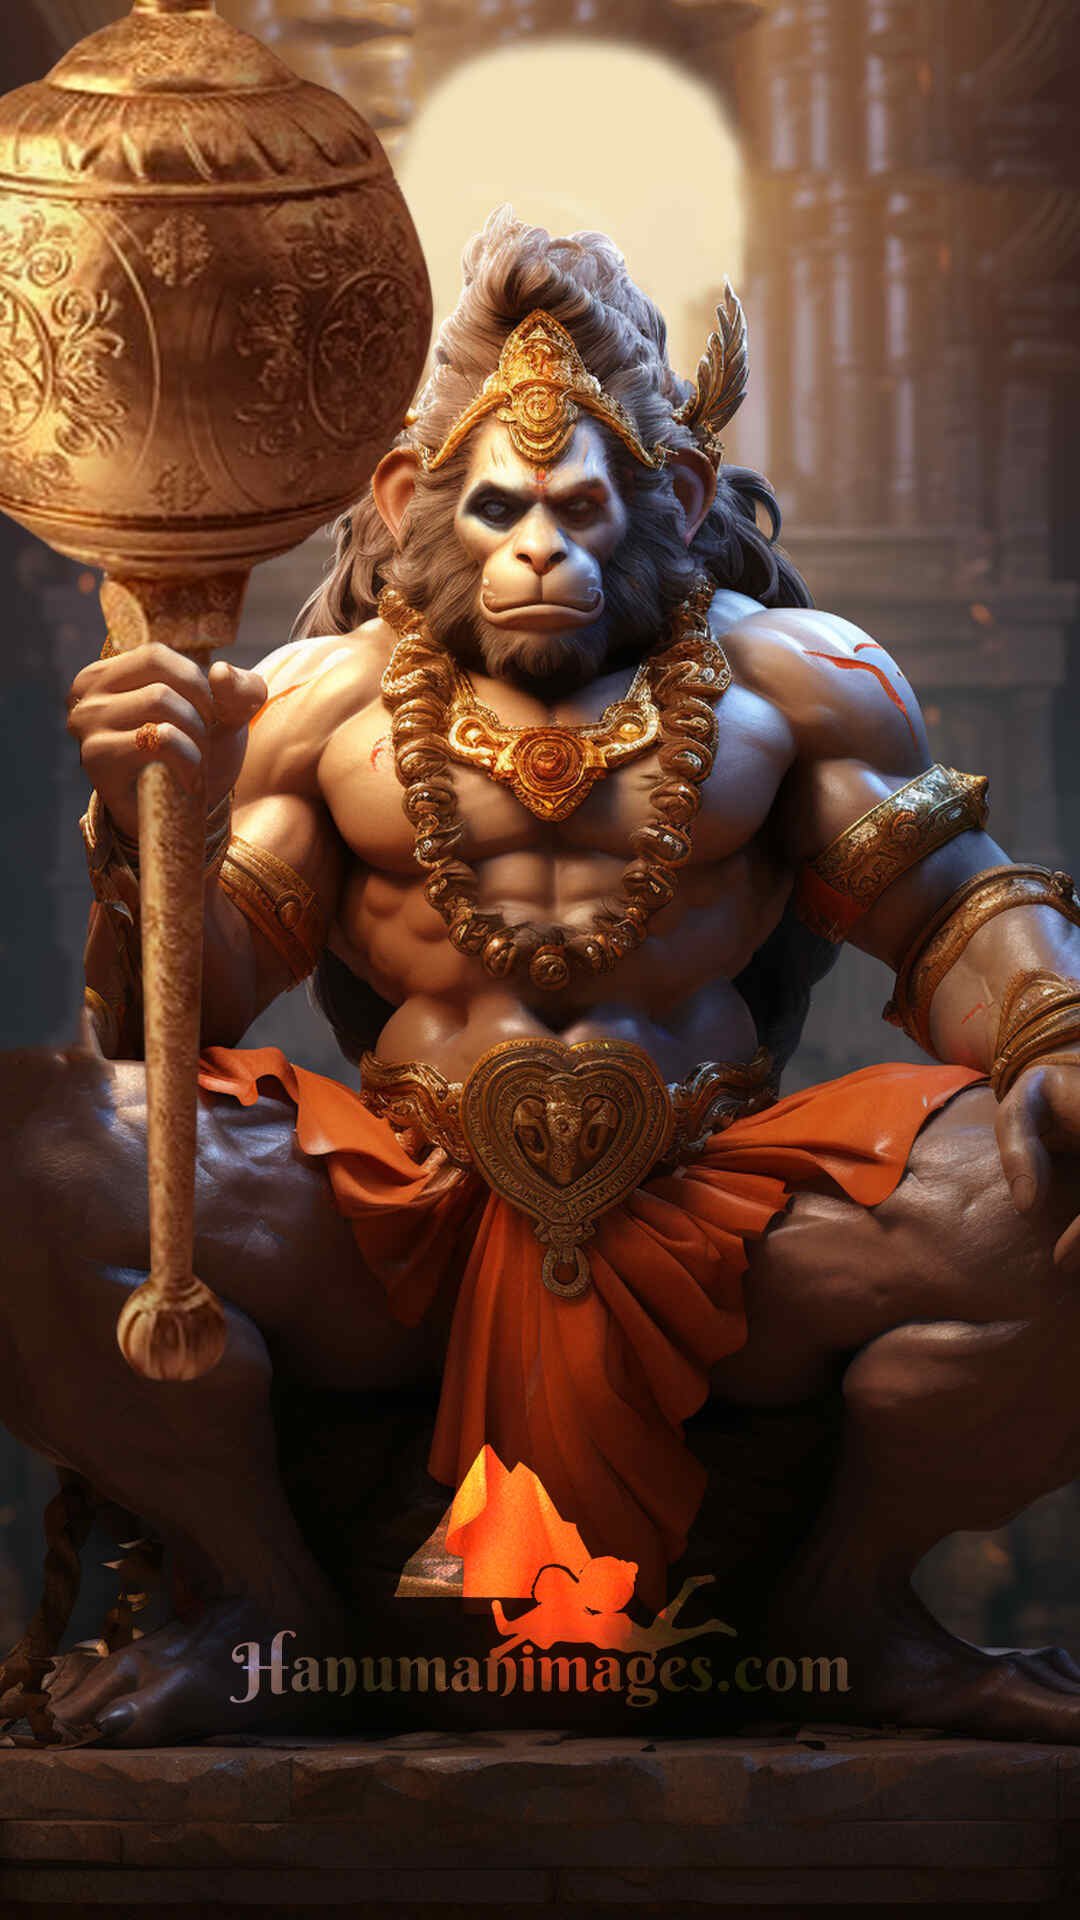 Ultimate Collection of Angry Hanuman Images - Spectacular 4K Angry Hanuman  Images